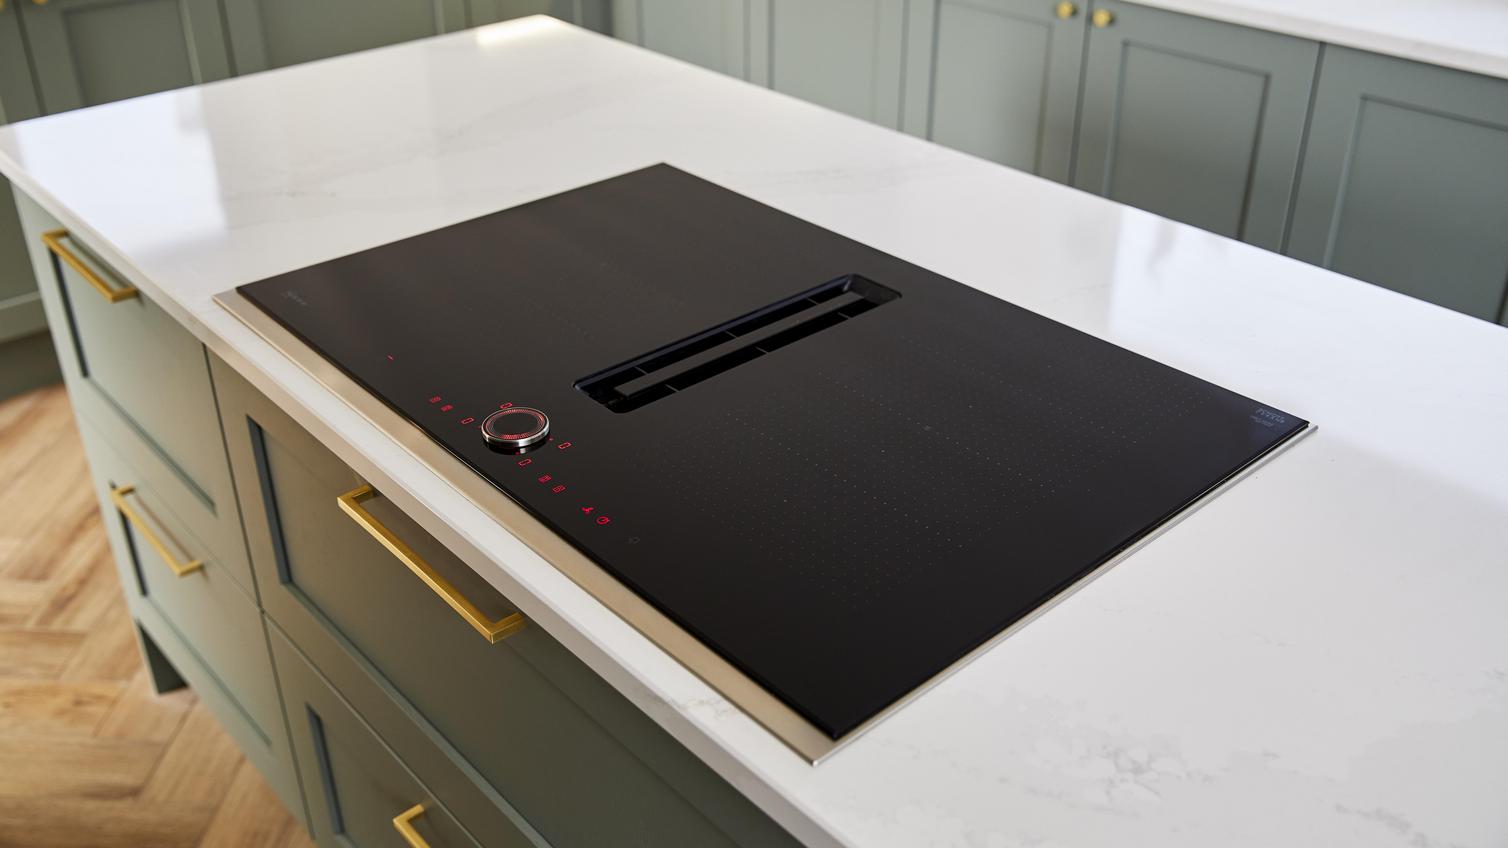 Black induction hob with a shiny surface on a reed green shaker island, with brass handles and a white quartz worktop.